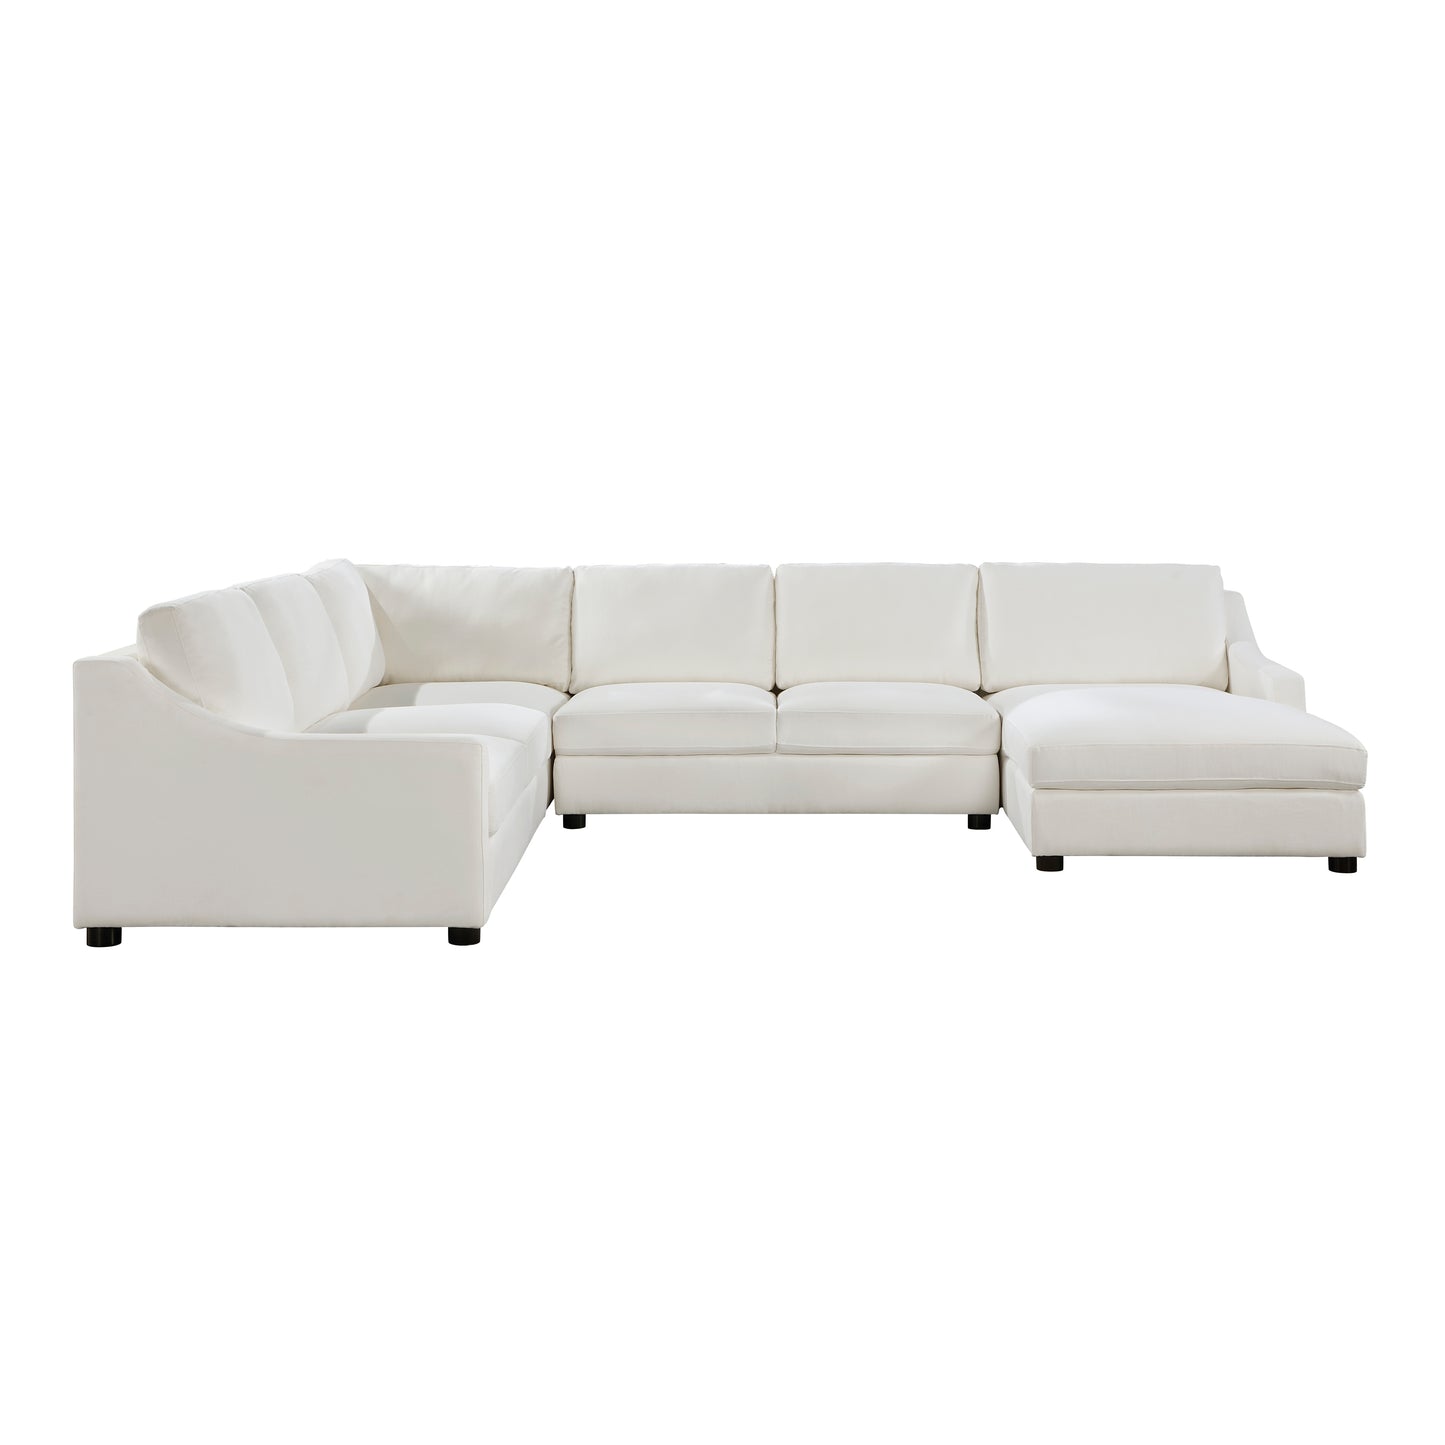 Zayden 4PCS Sectional RAF ONLY CREAM ONLY